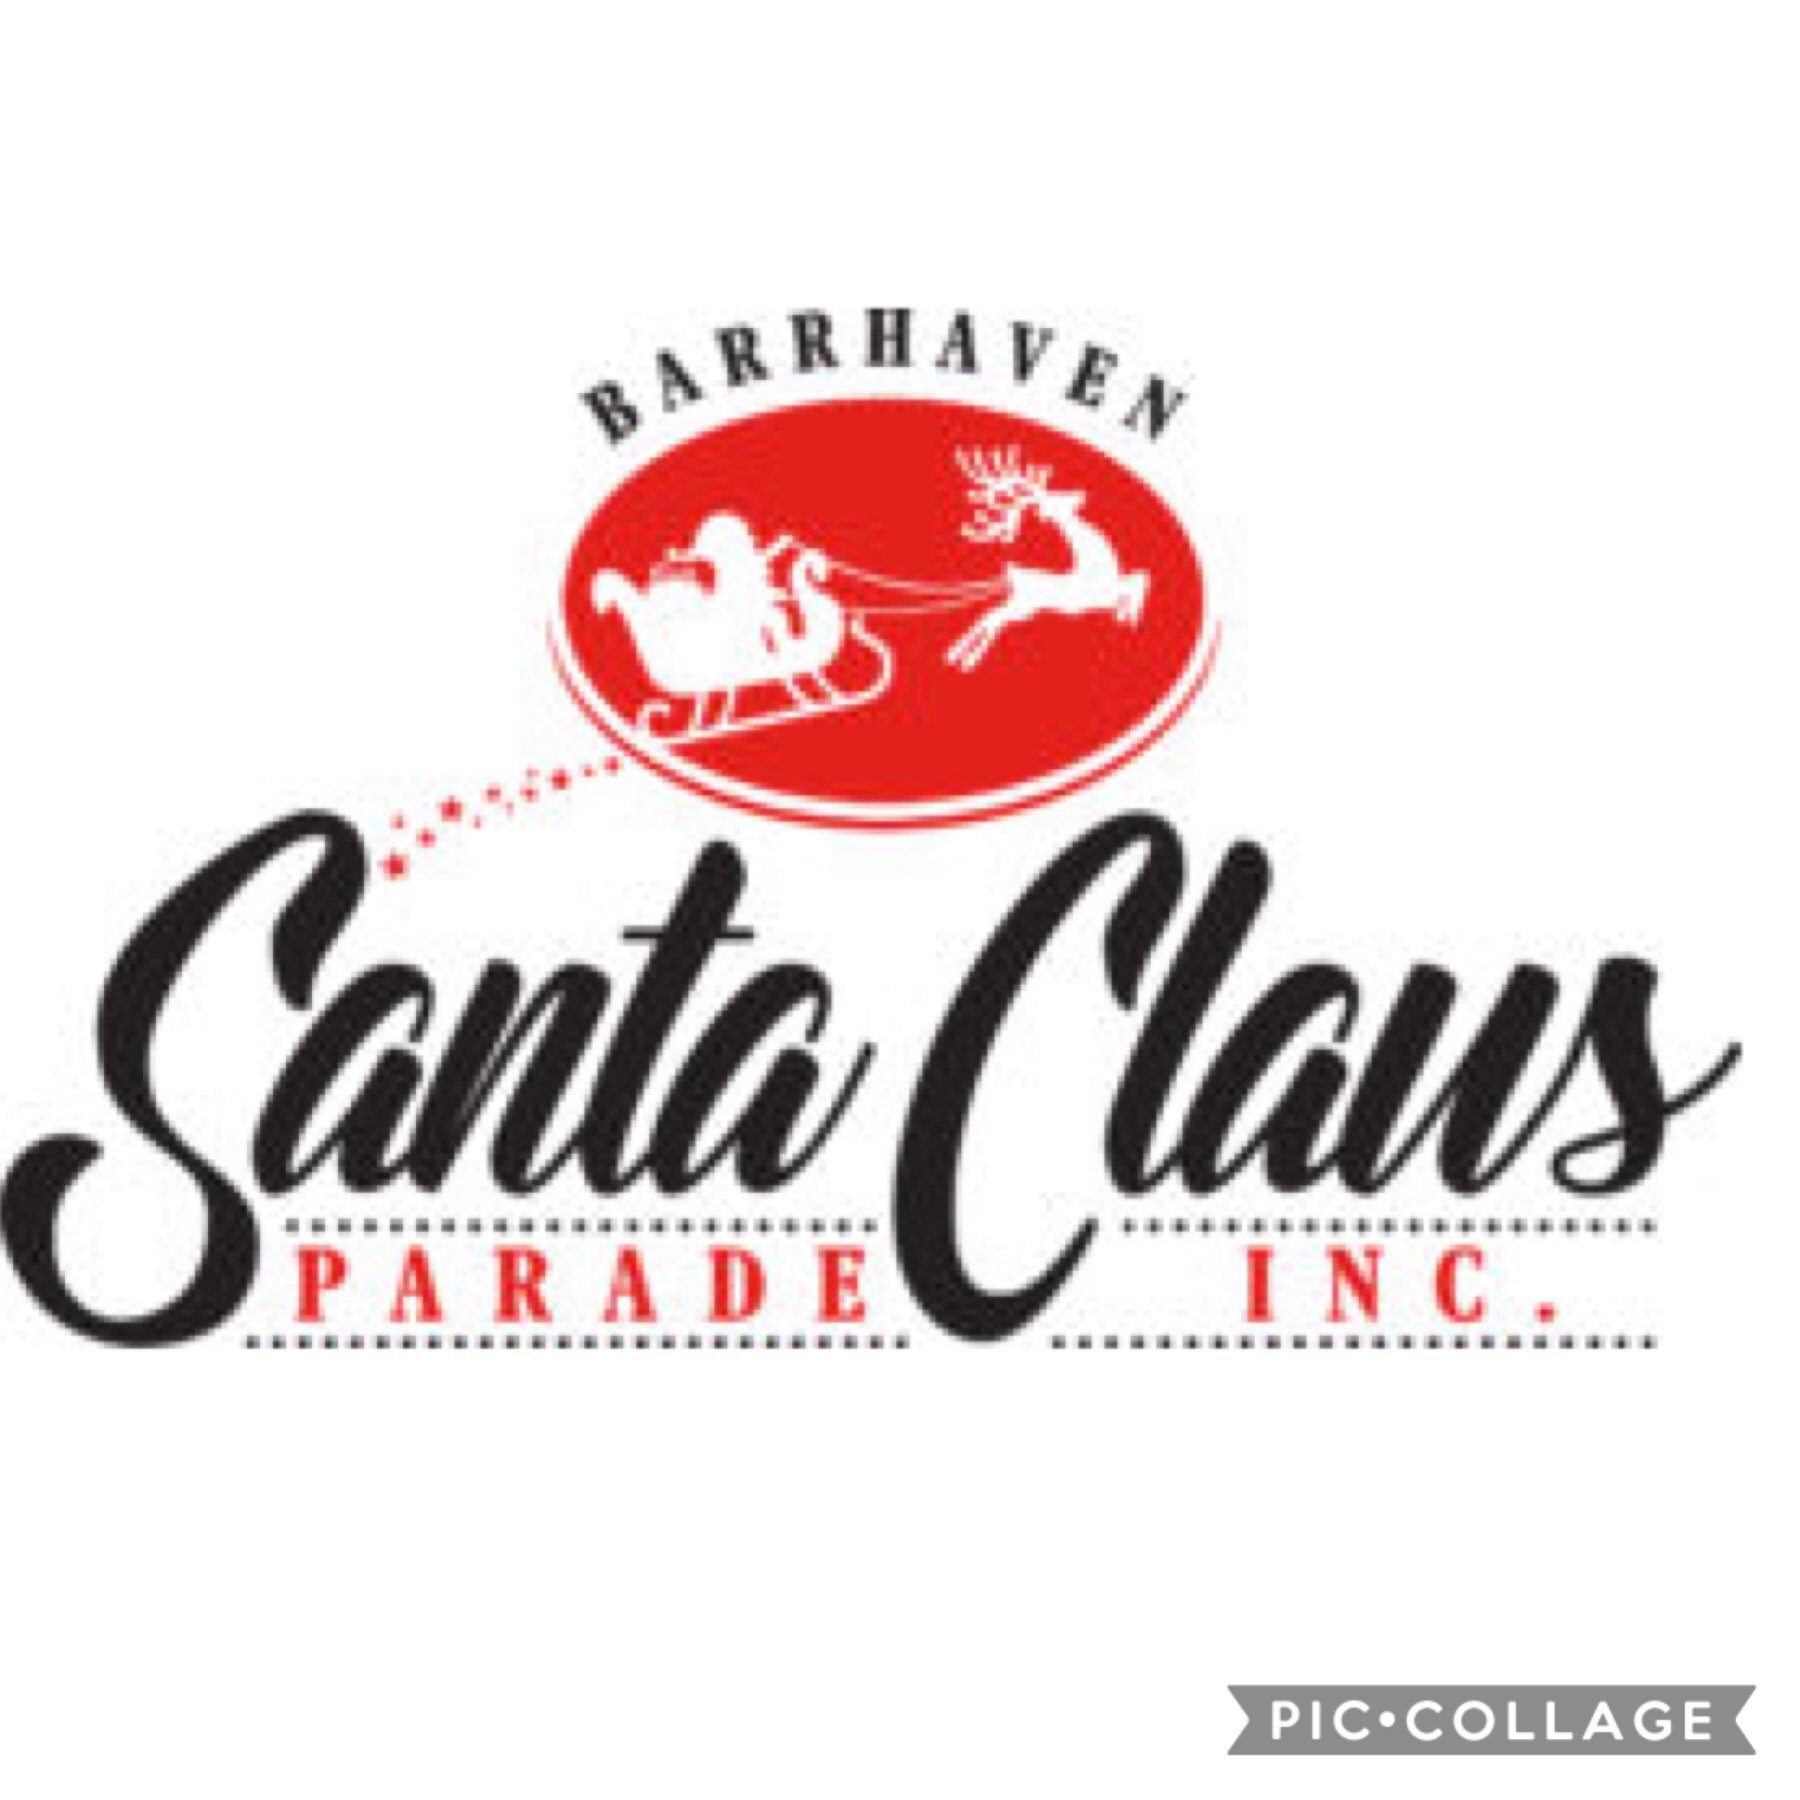 Official page for the Barrhaven Santa Claus Parade